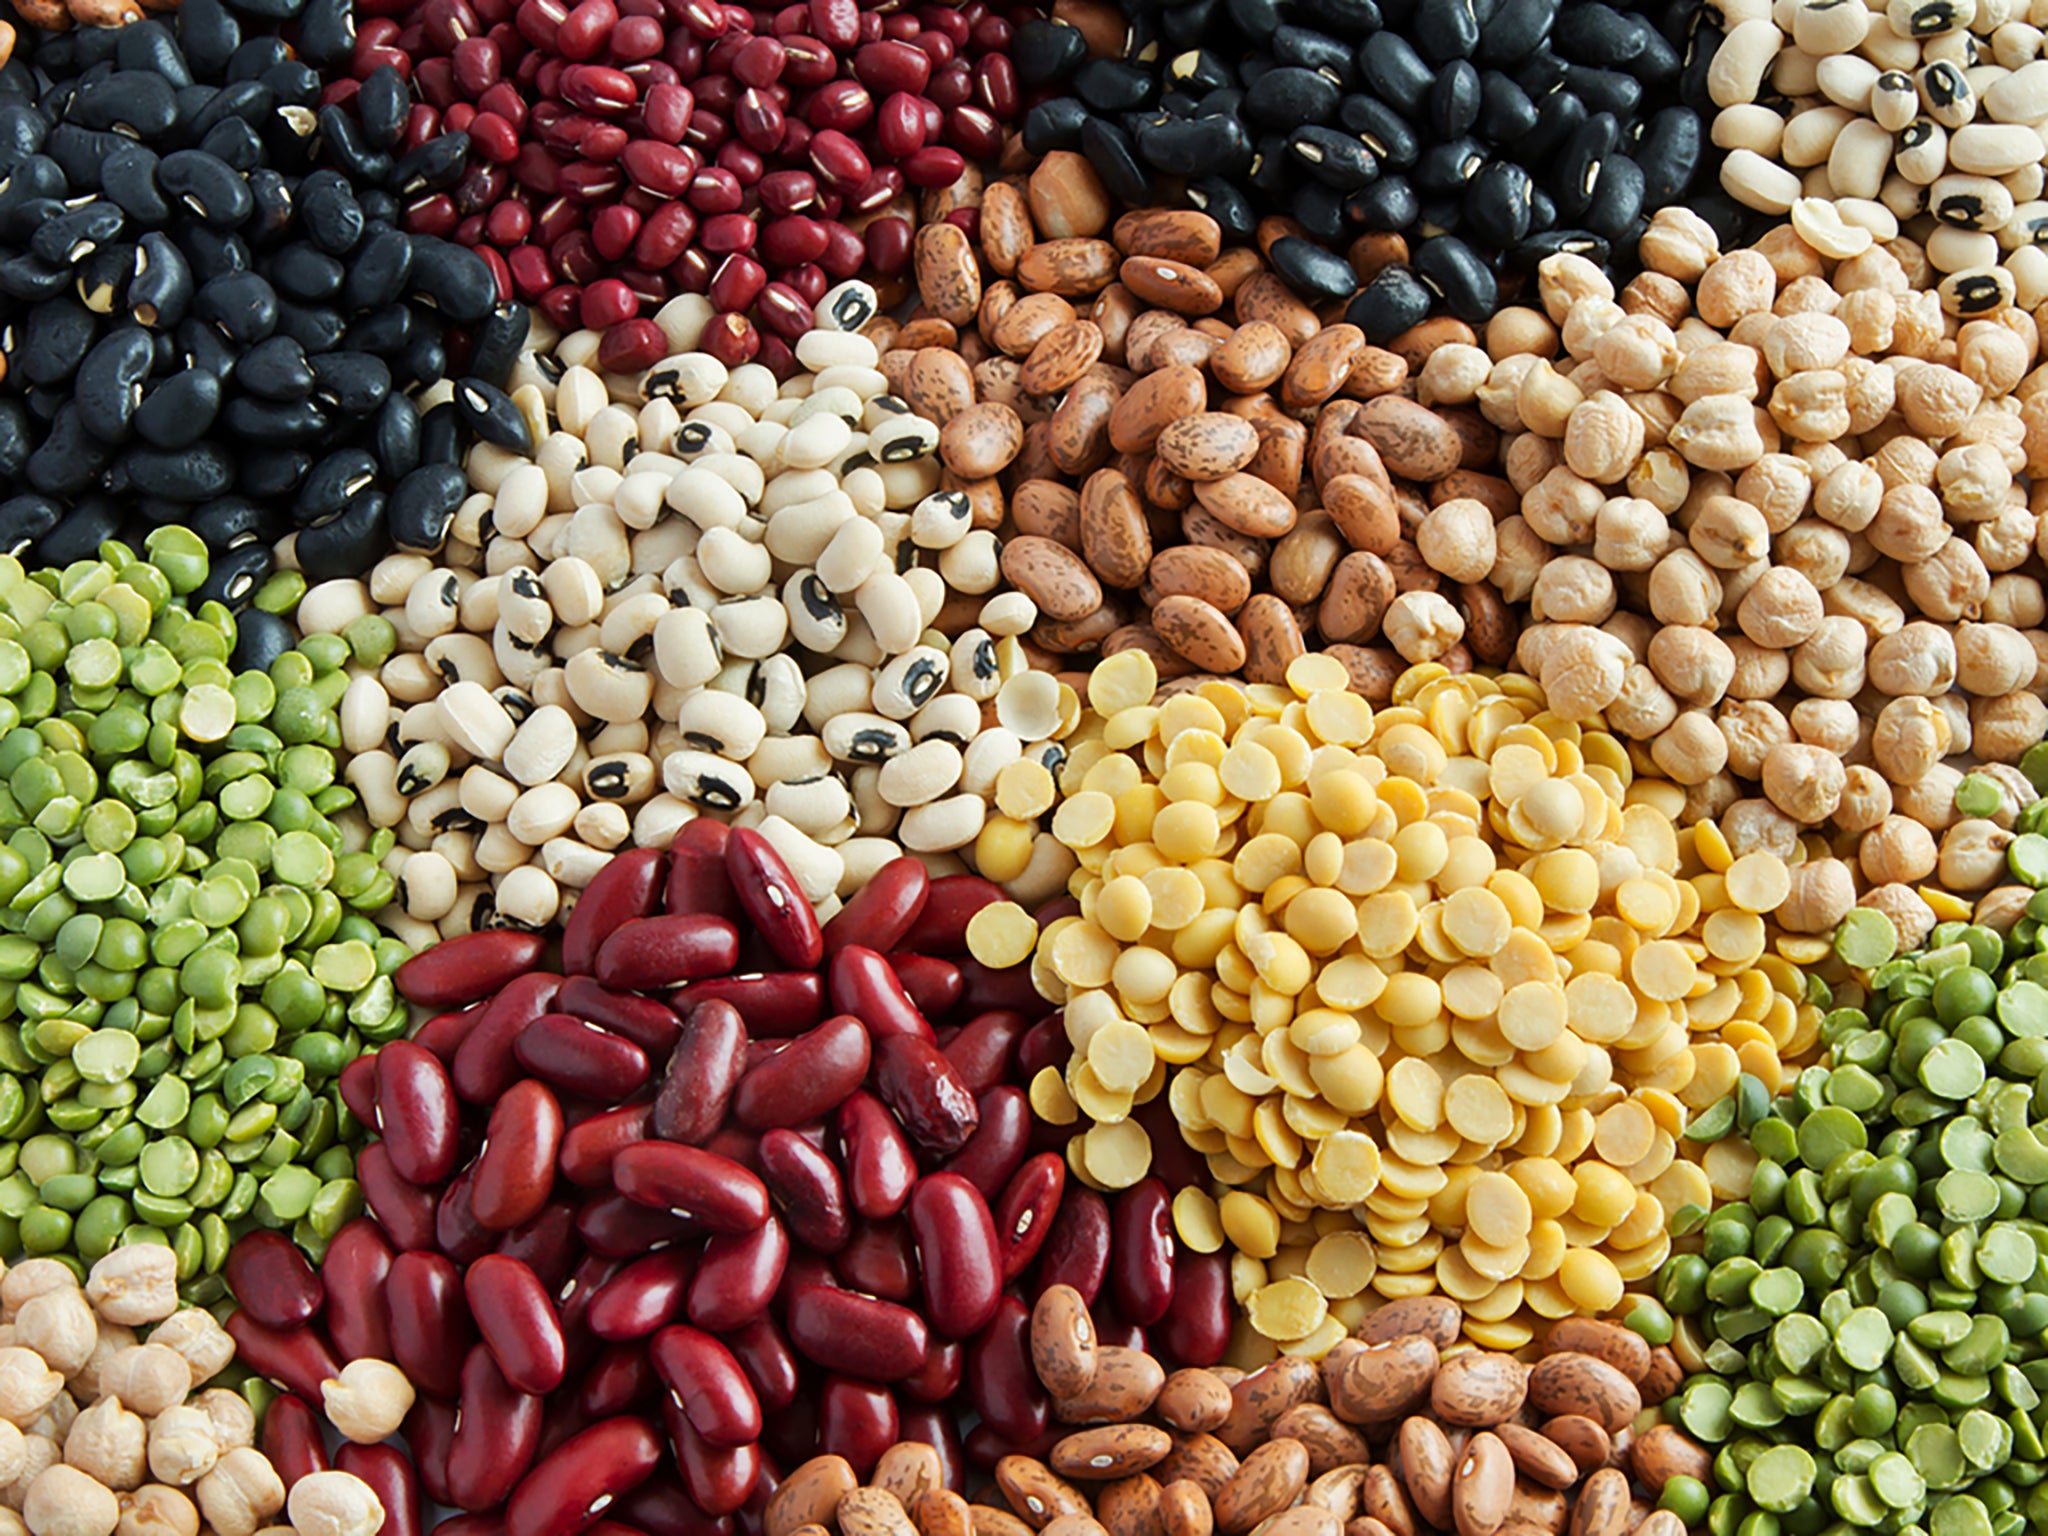 ‘Beans are a climate-positive solution that help tackle the global food, climate and cost of living crises’